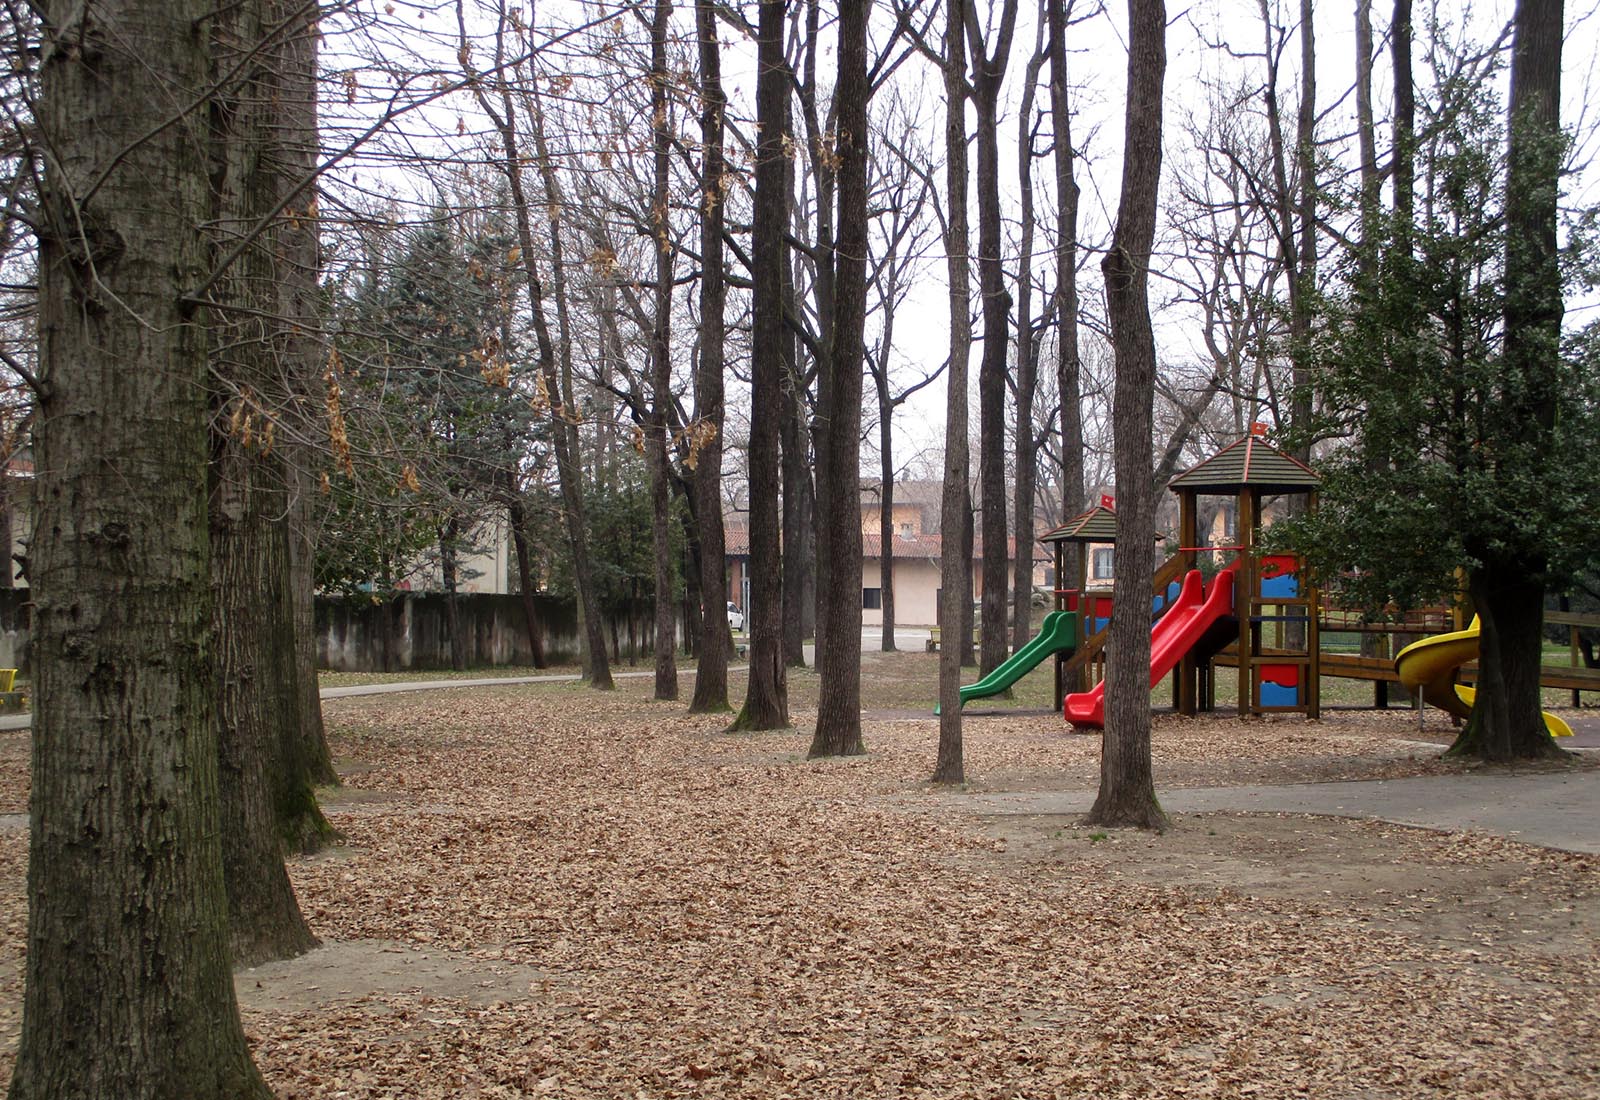 House in the Caduti Nassirya park in Somma Lombardo - View of the park